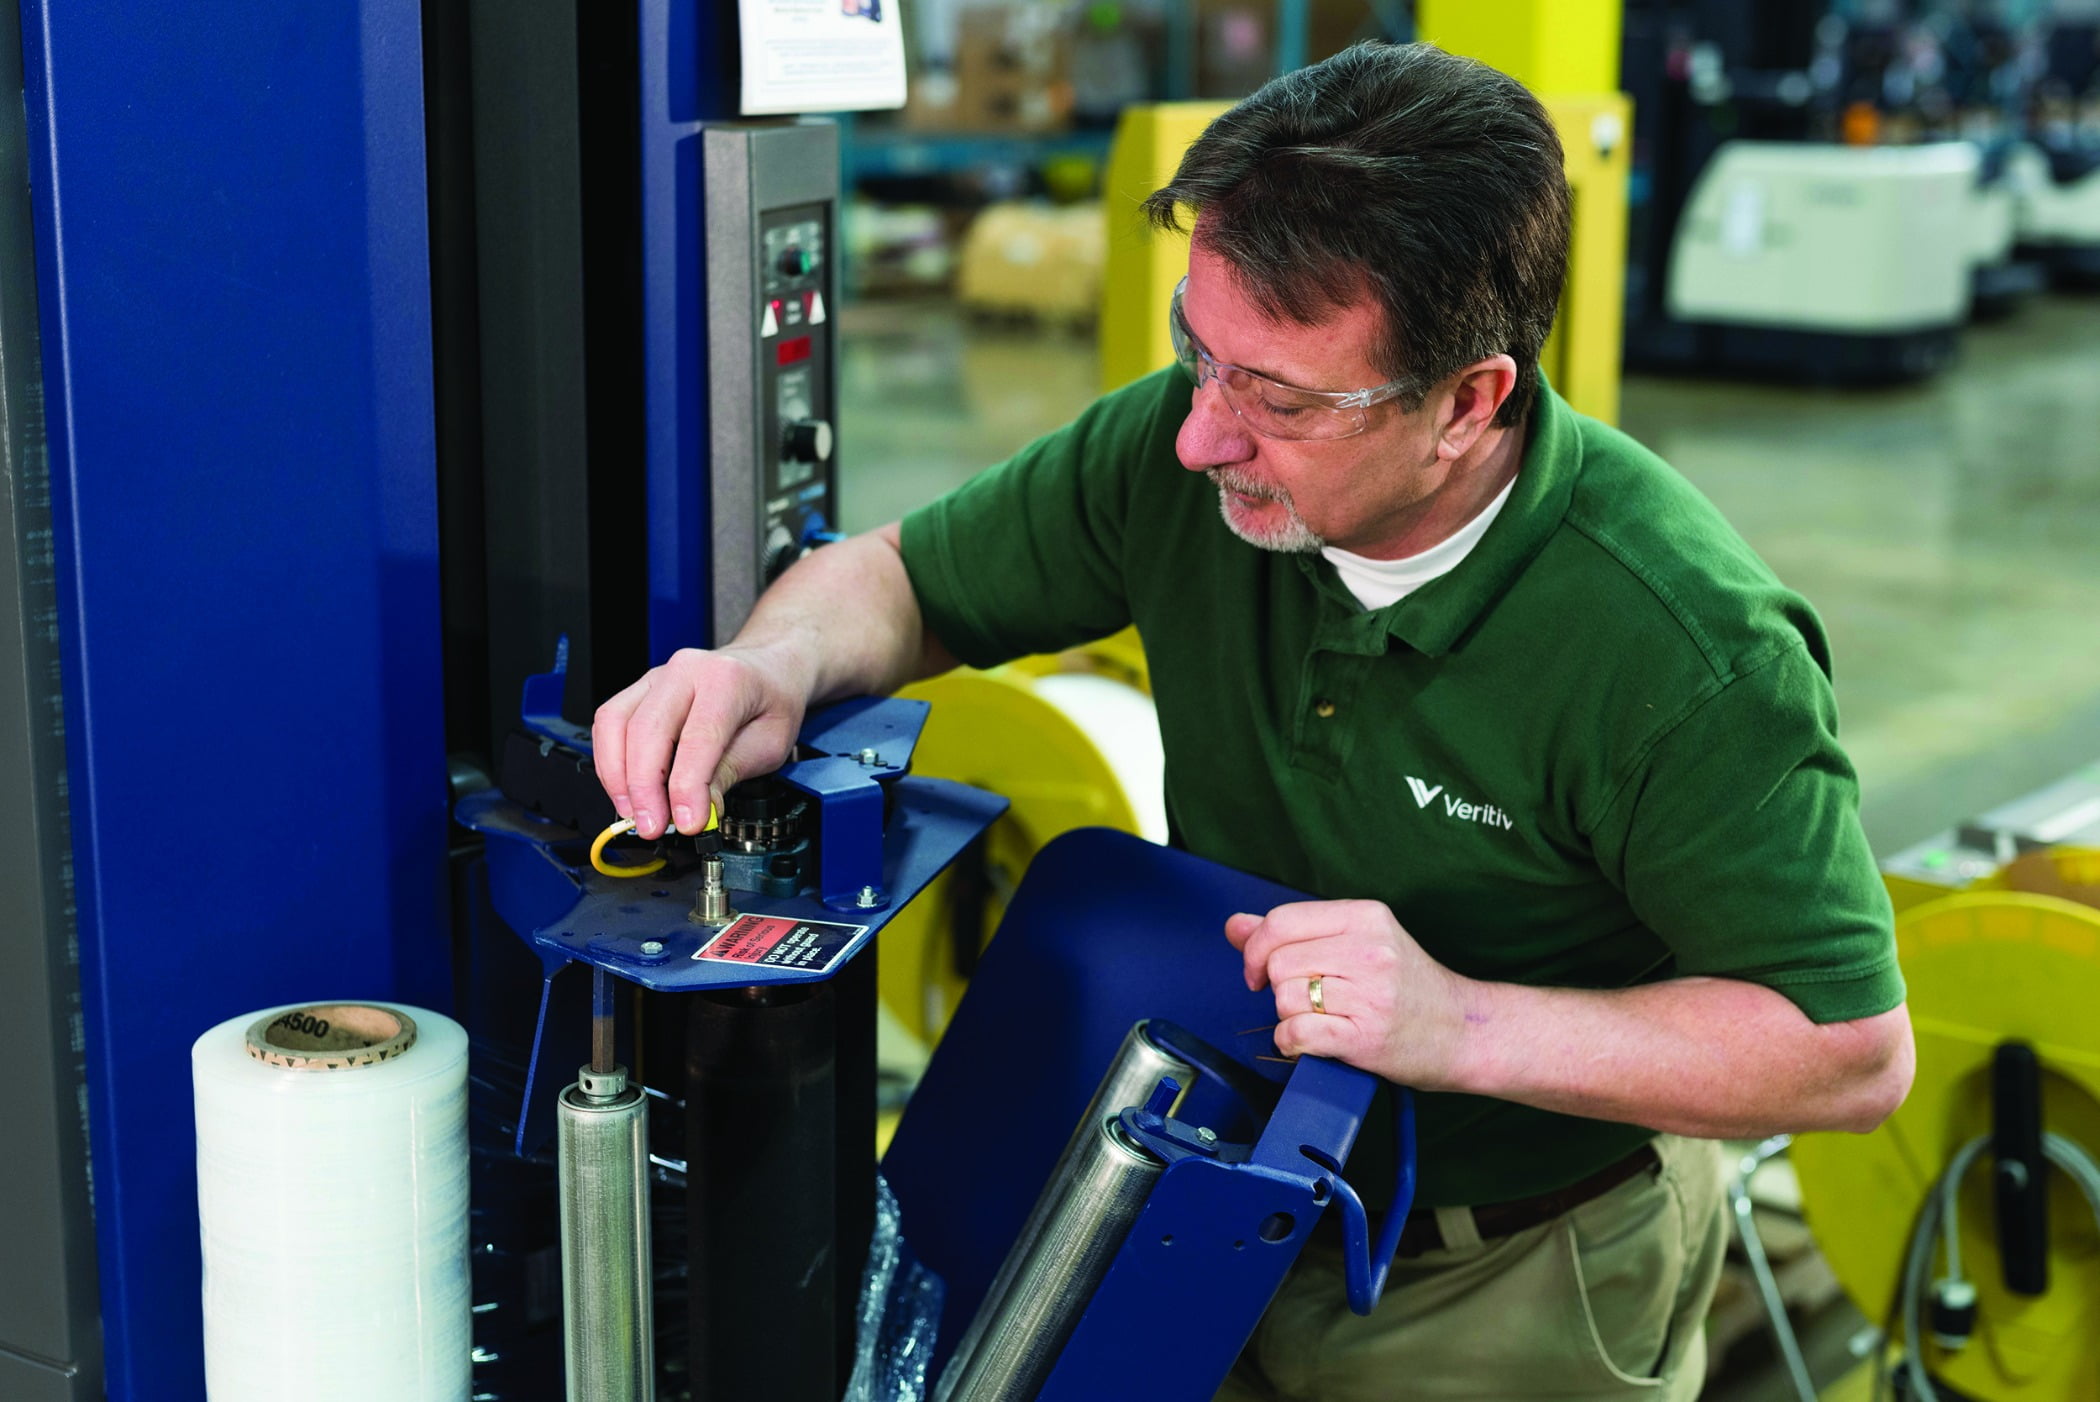 Factory-trained technician can analyze, repair and maintain equipment